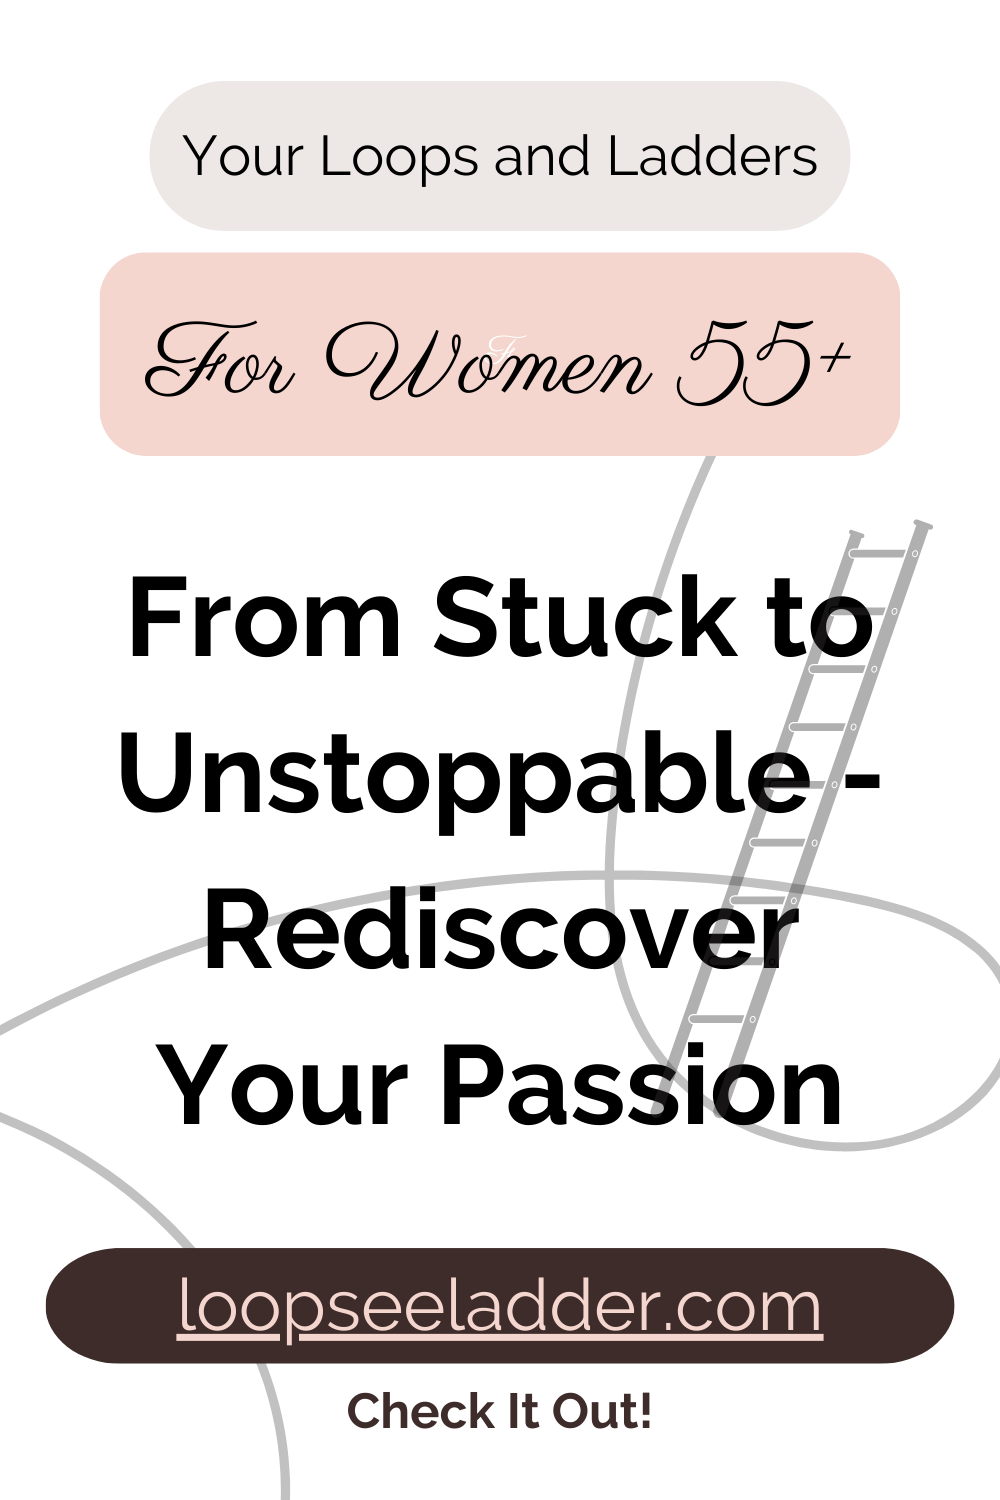 From Stuck to Unstoppable: How Women 55+ Can Rediscover Their Passion